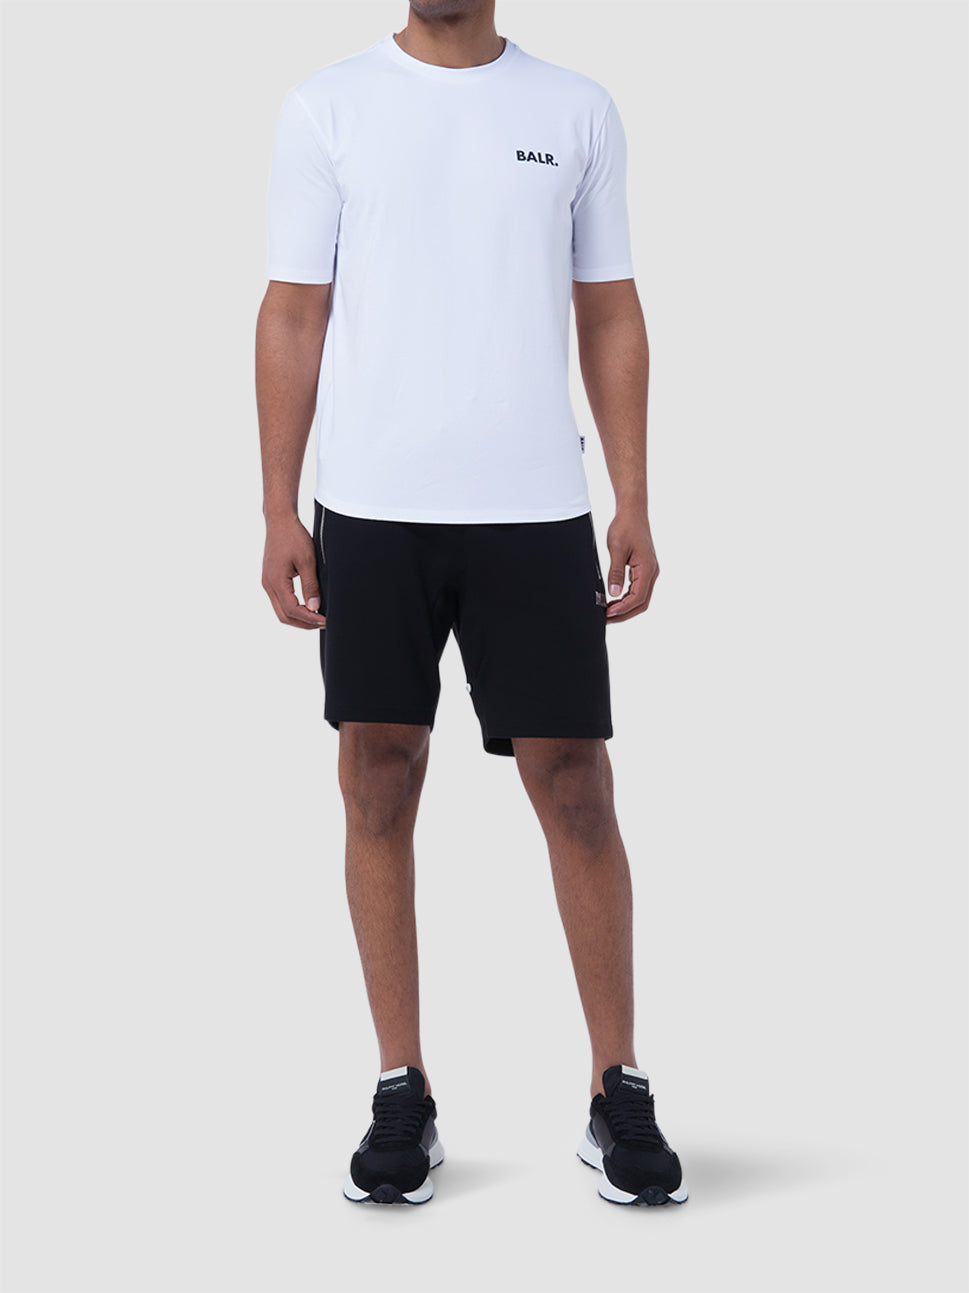 balr athletic small branded chest white tshirt